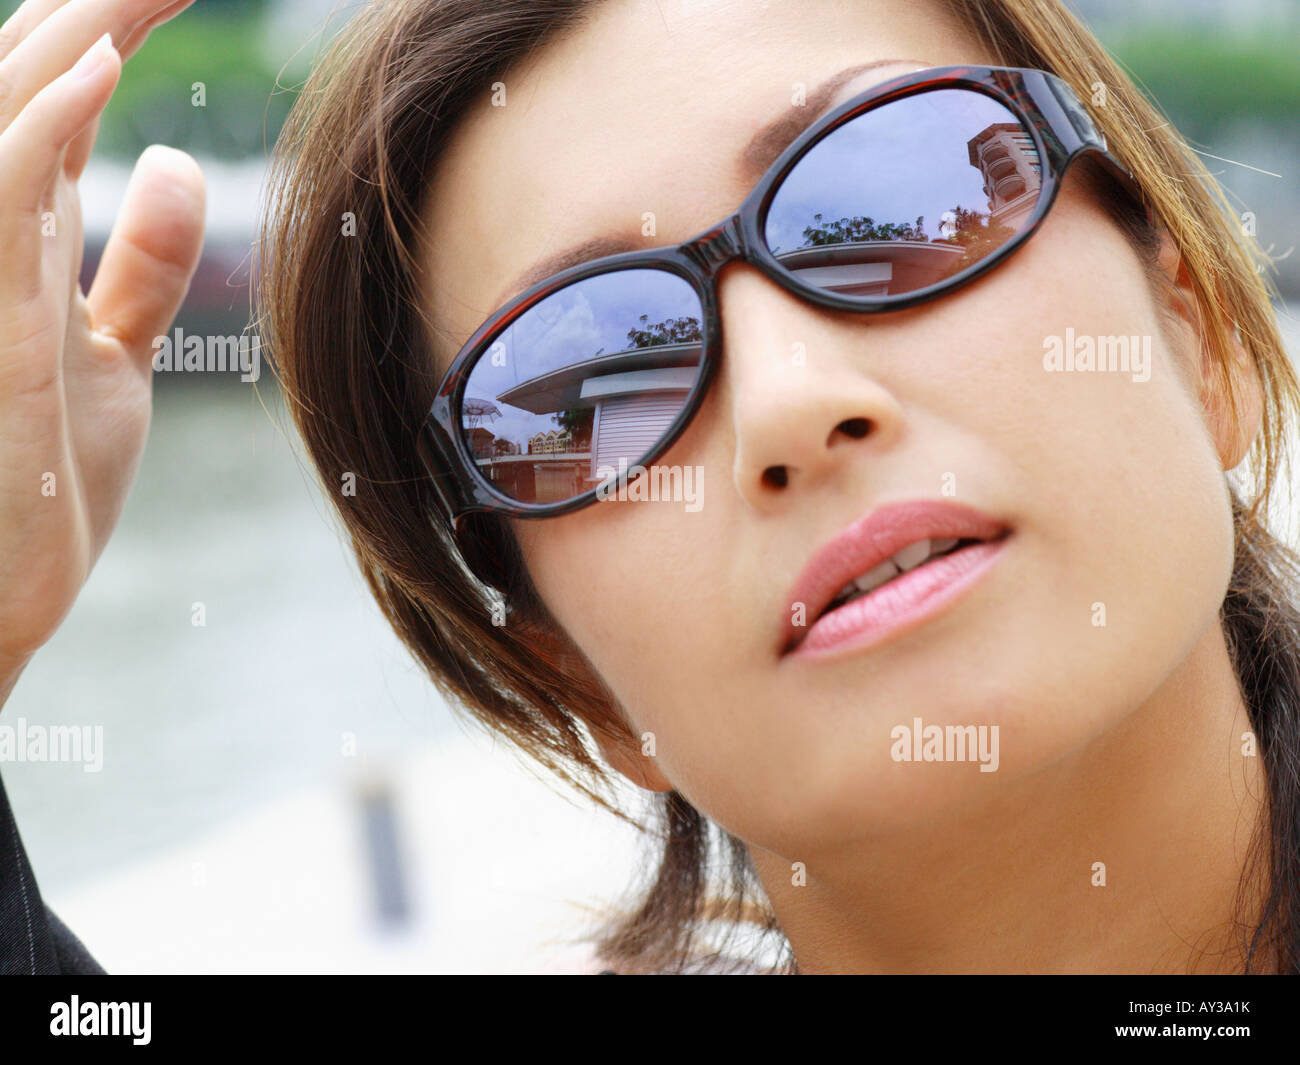 Close-up of a mid adult woman wearing sunglasses Stock Photo